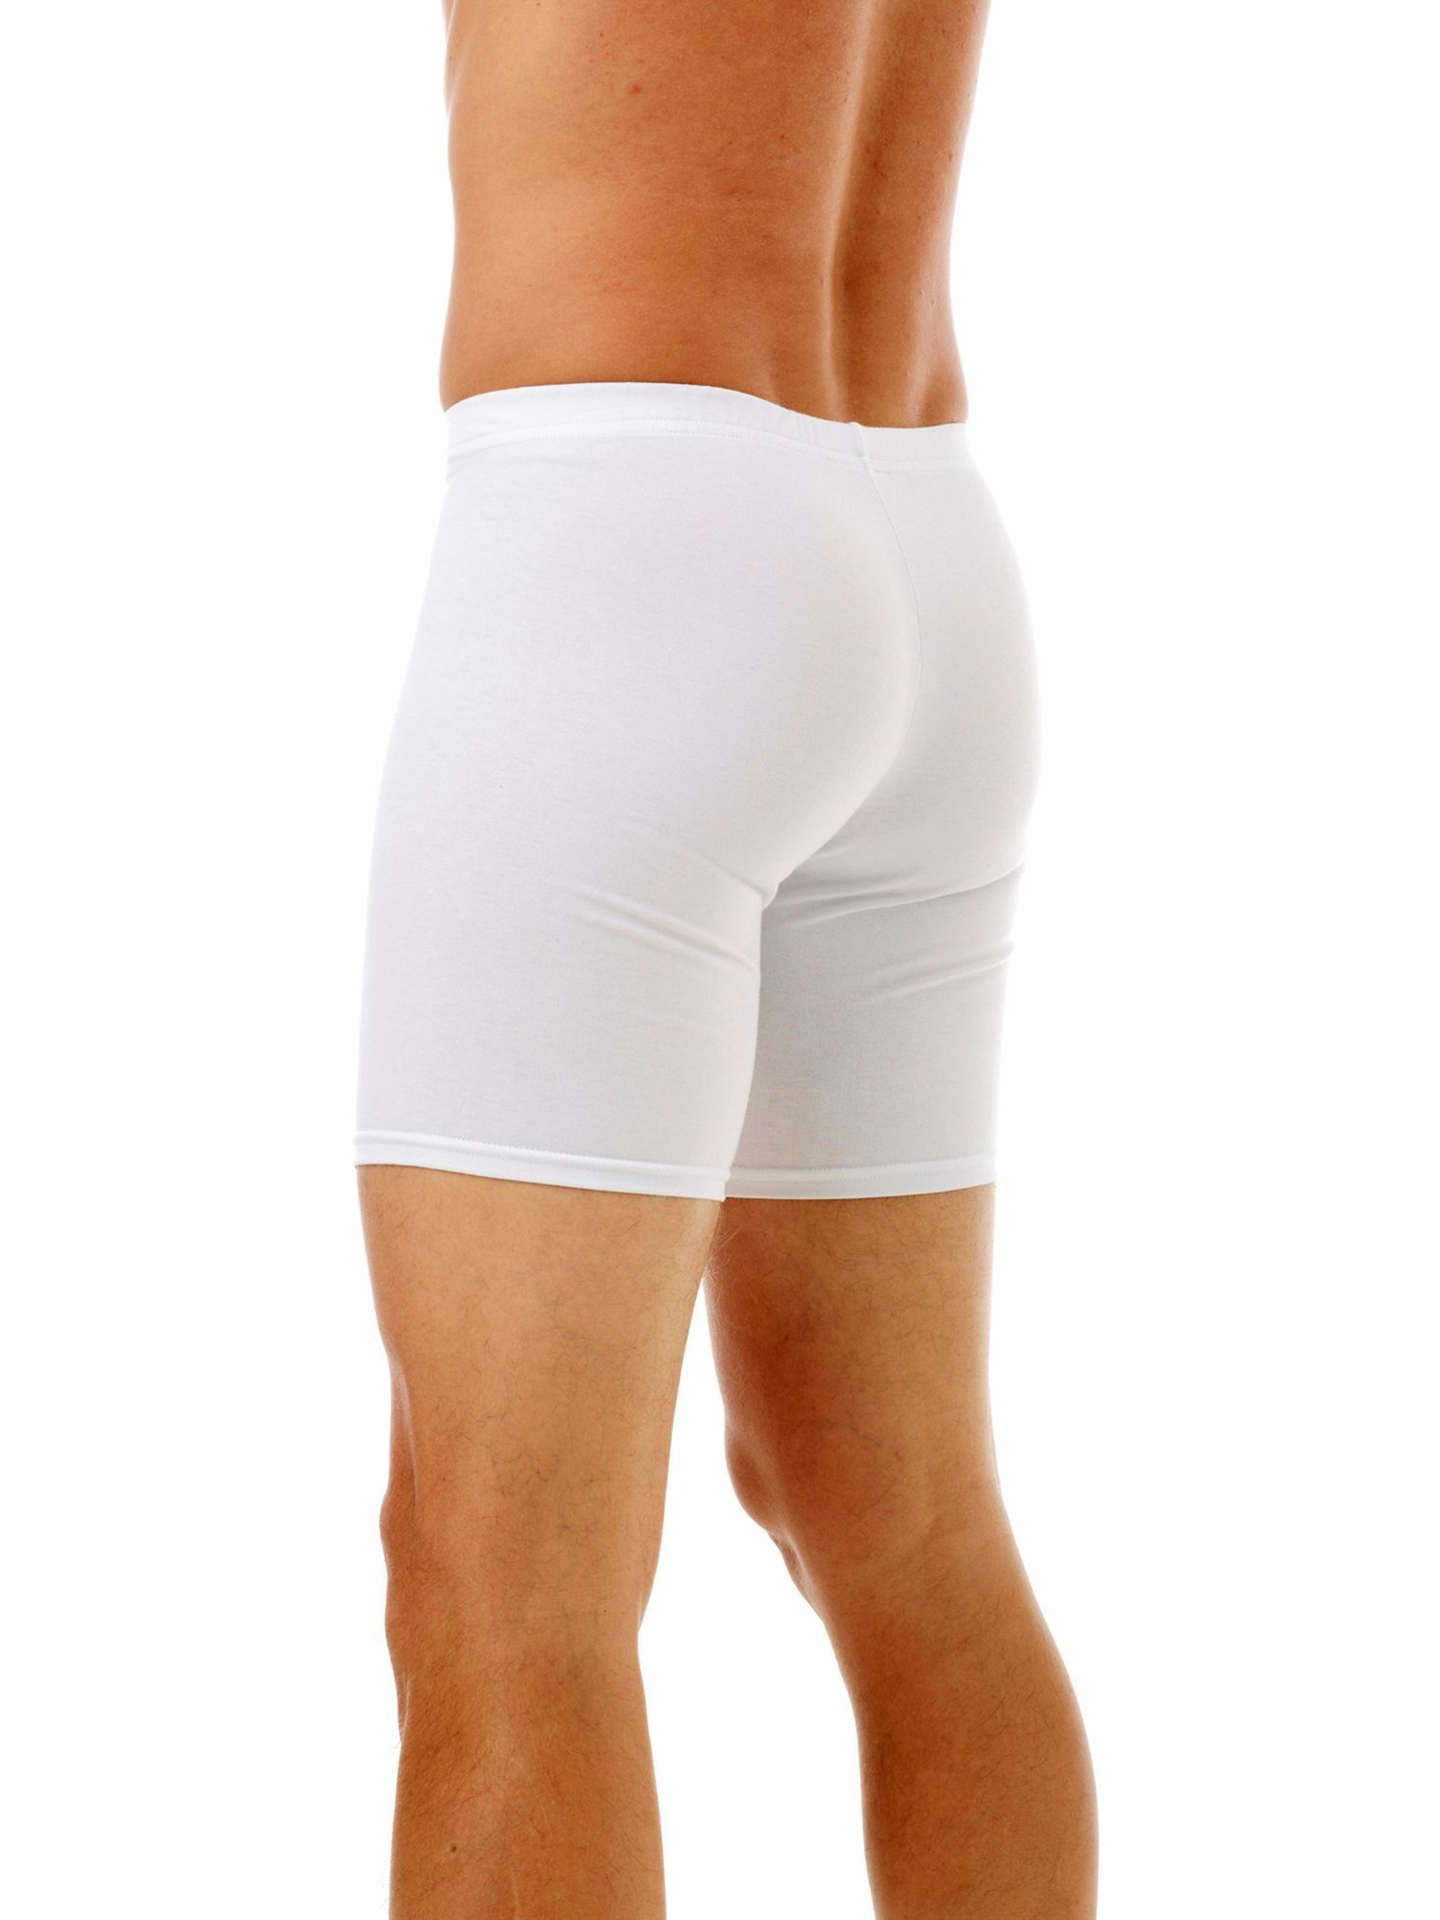 Cyclist boxer briefs fly white - Long Life Cotton